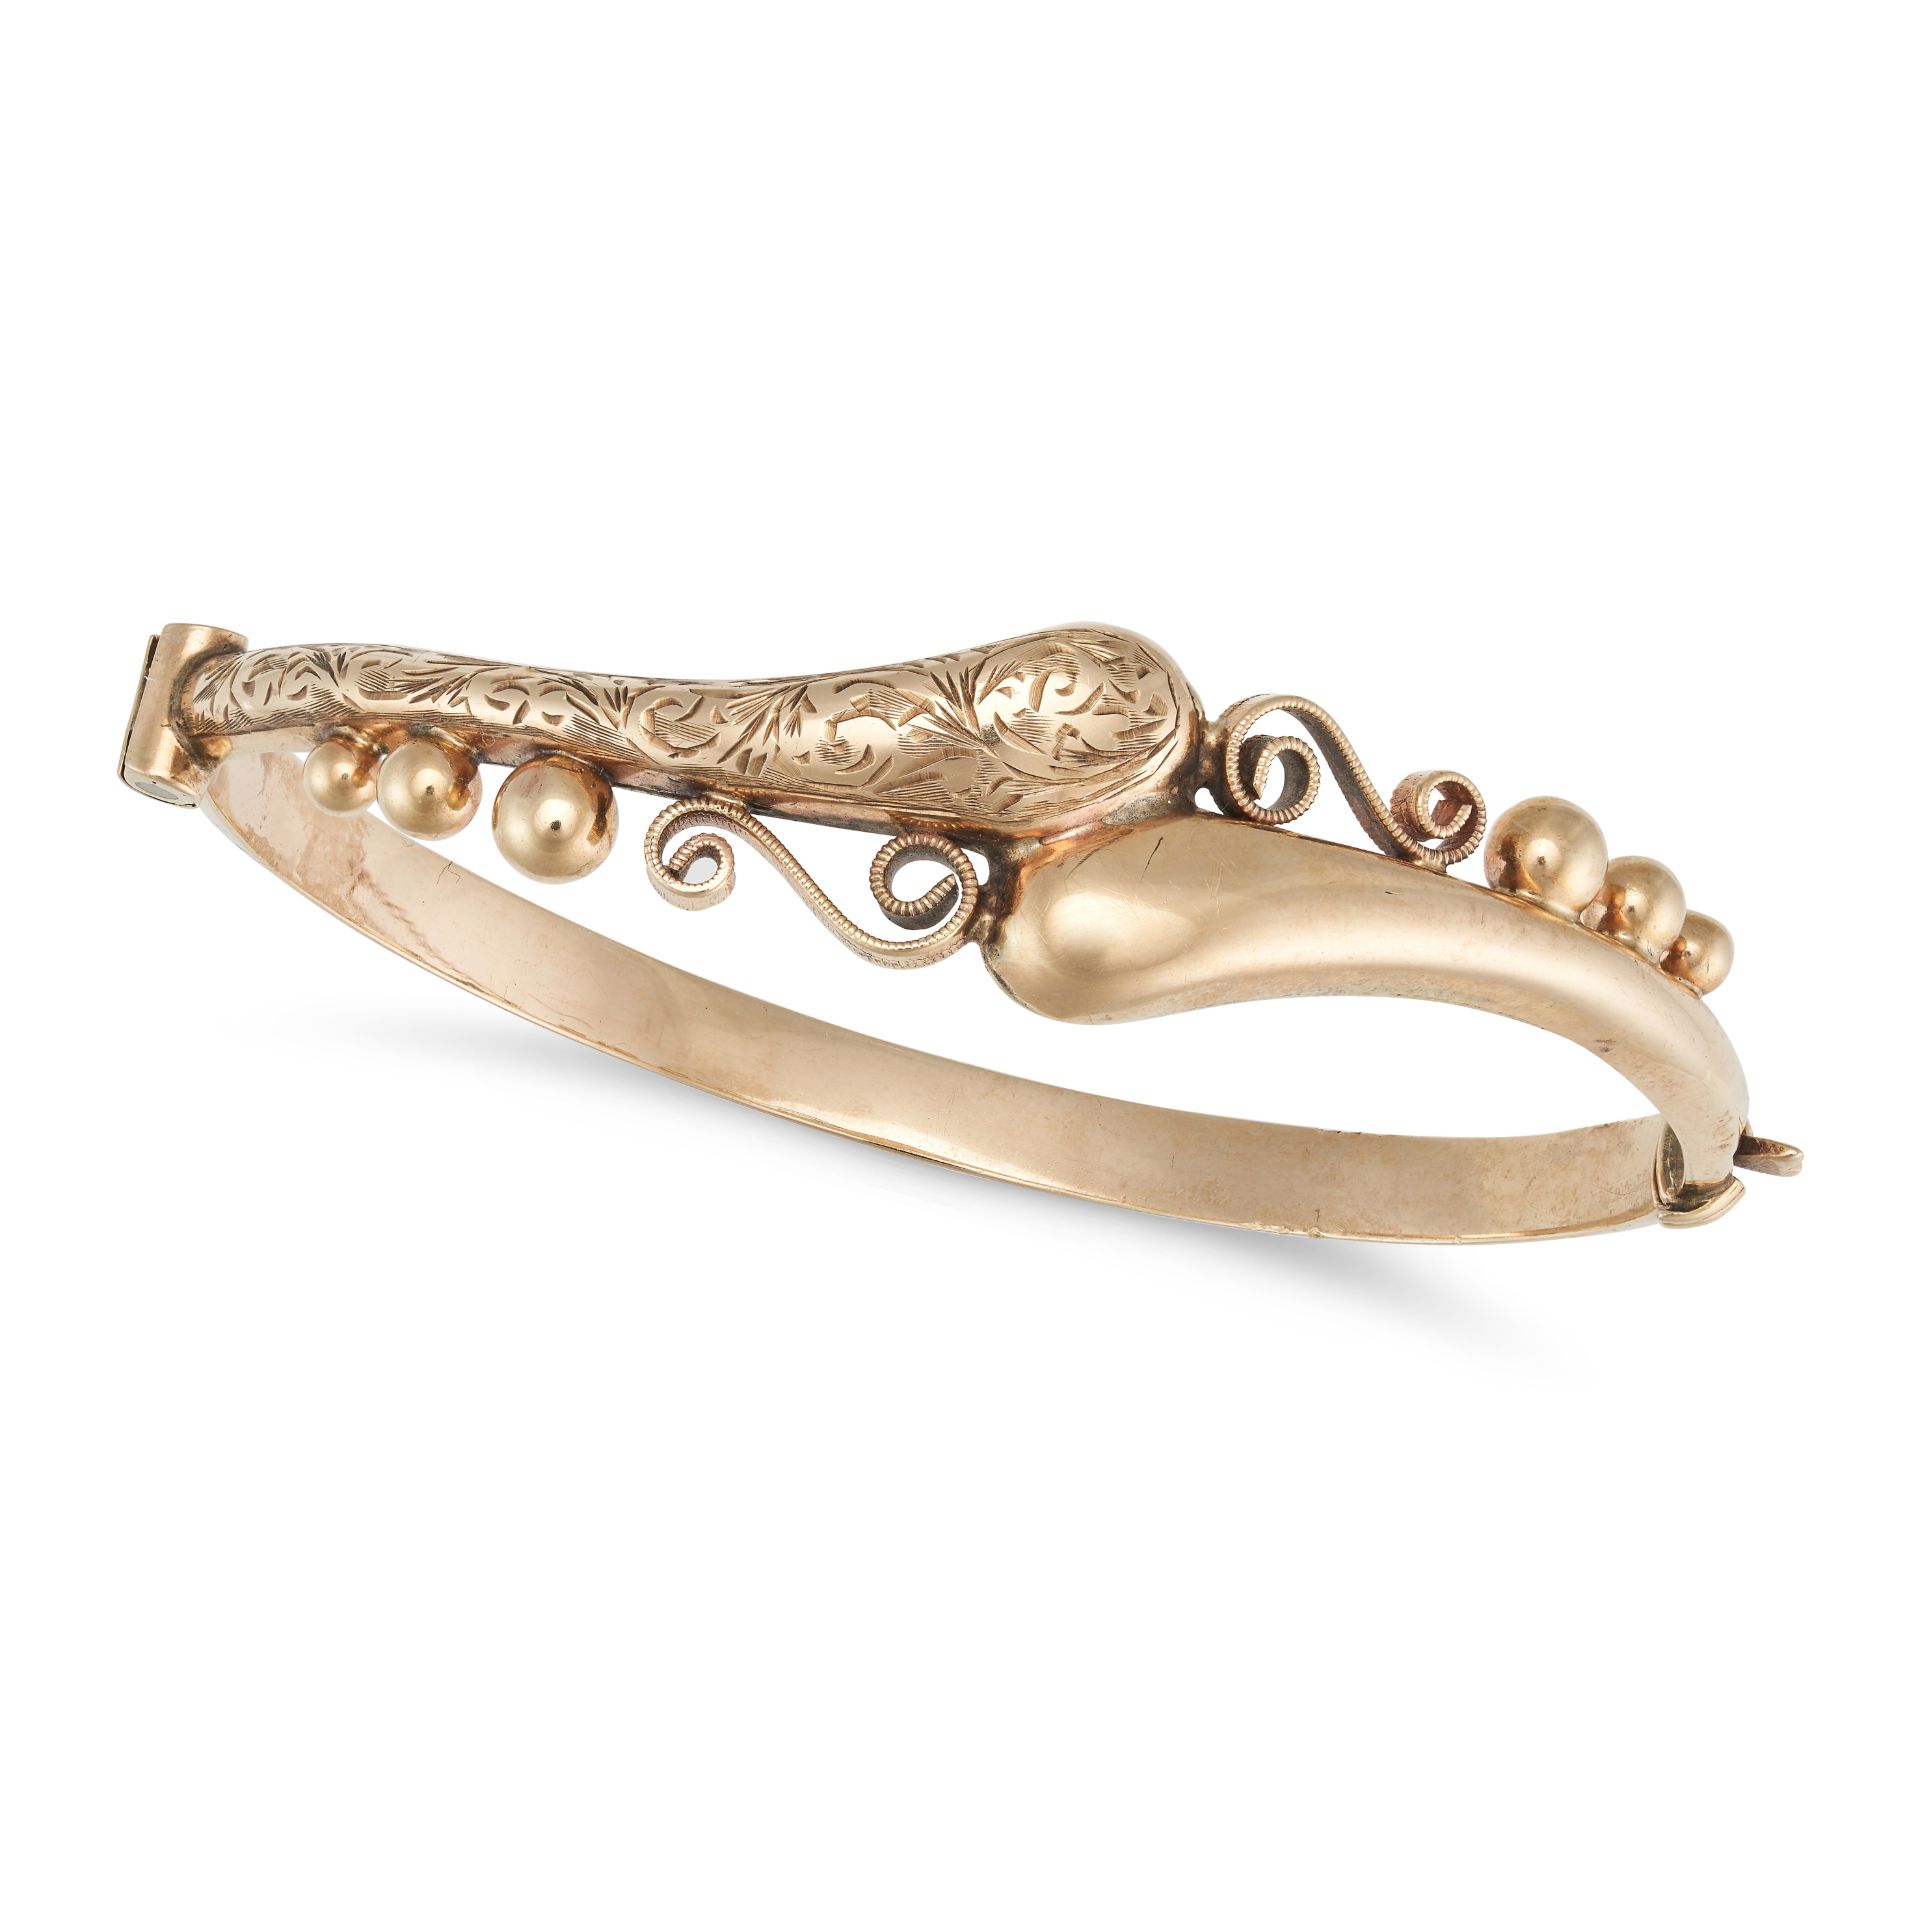 A GOLD BANGLE in 9ct yellow gold, the bangle in a stylised twisted design accented by gold beads,...